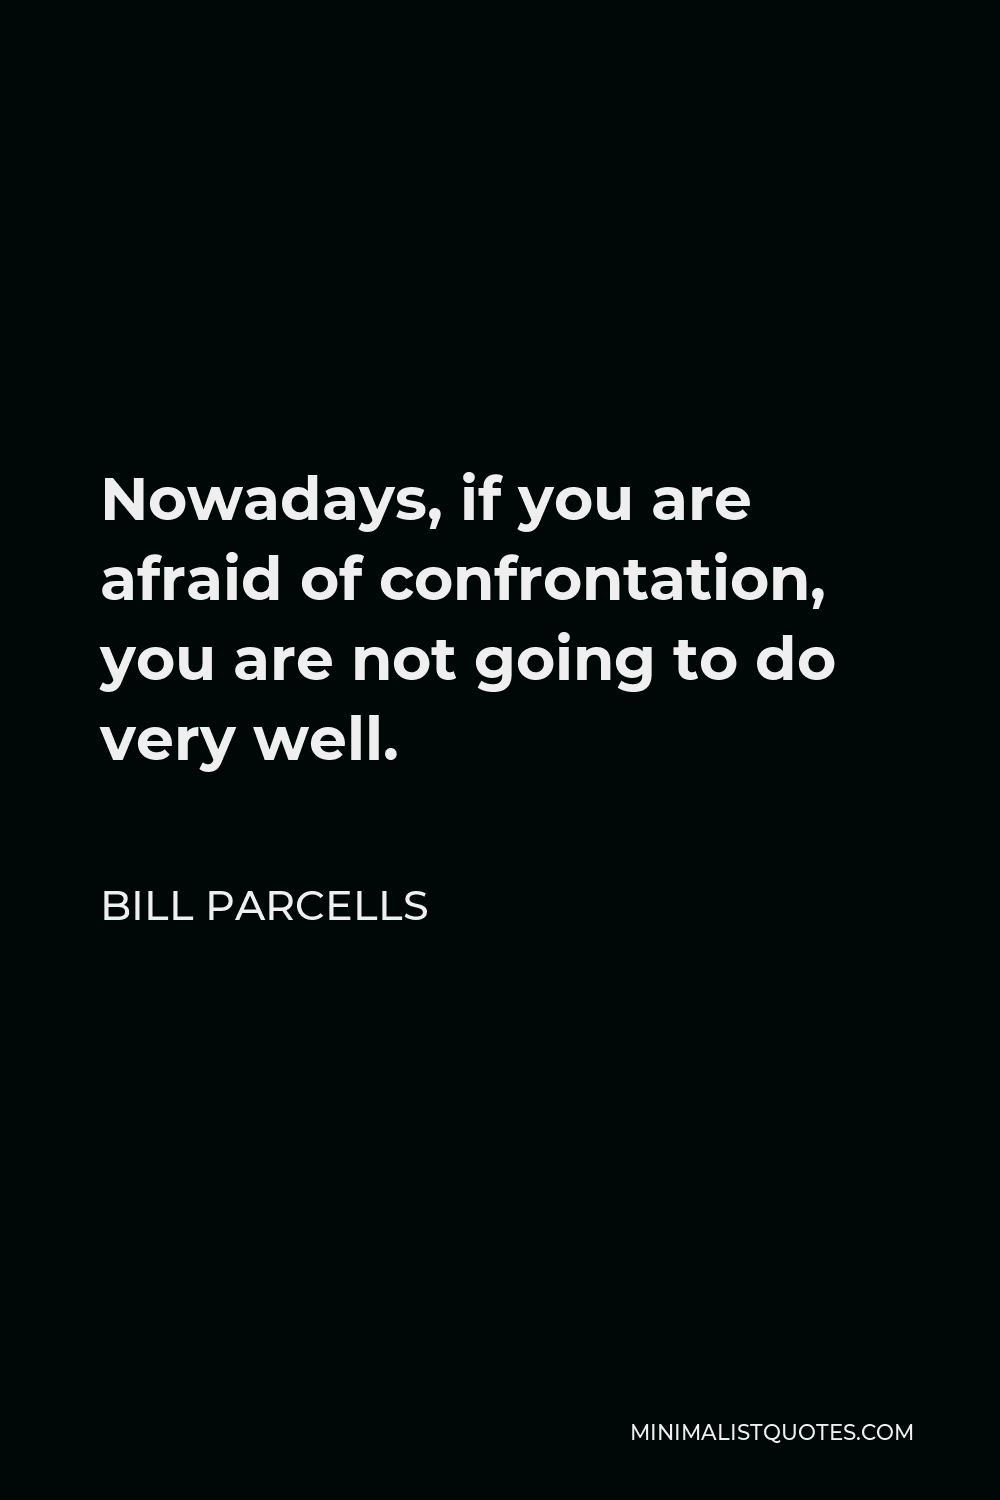 Bill Parcells Quote - Nowadays, if you are afraid of confrontation, you are not going to do very well.